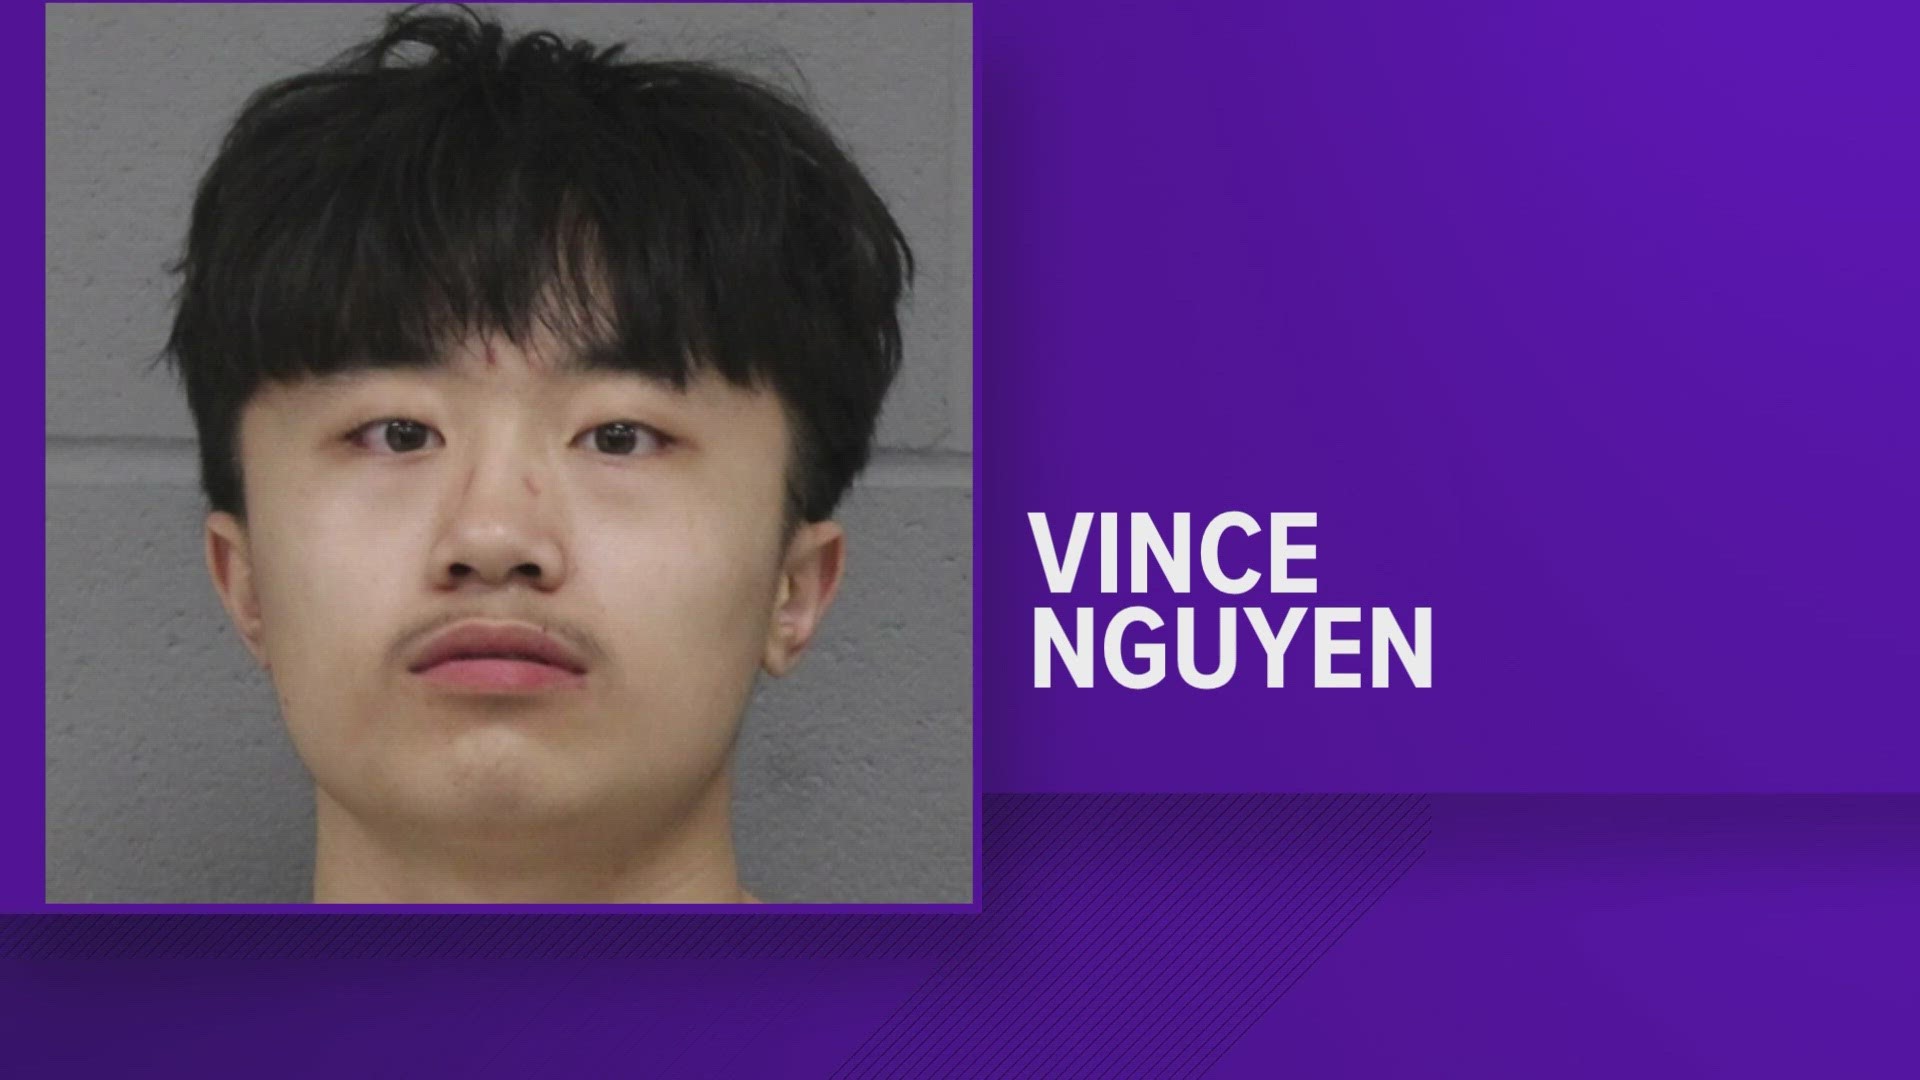 Vince Nguyen has been charged with two felonies and a misdemeanor.